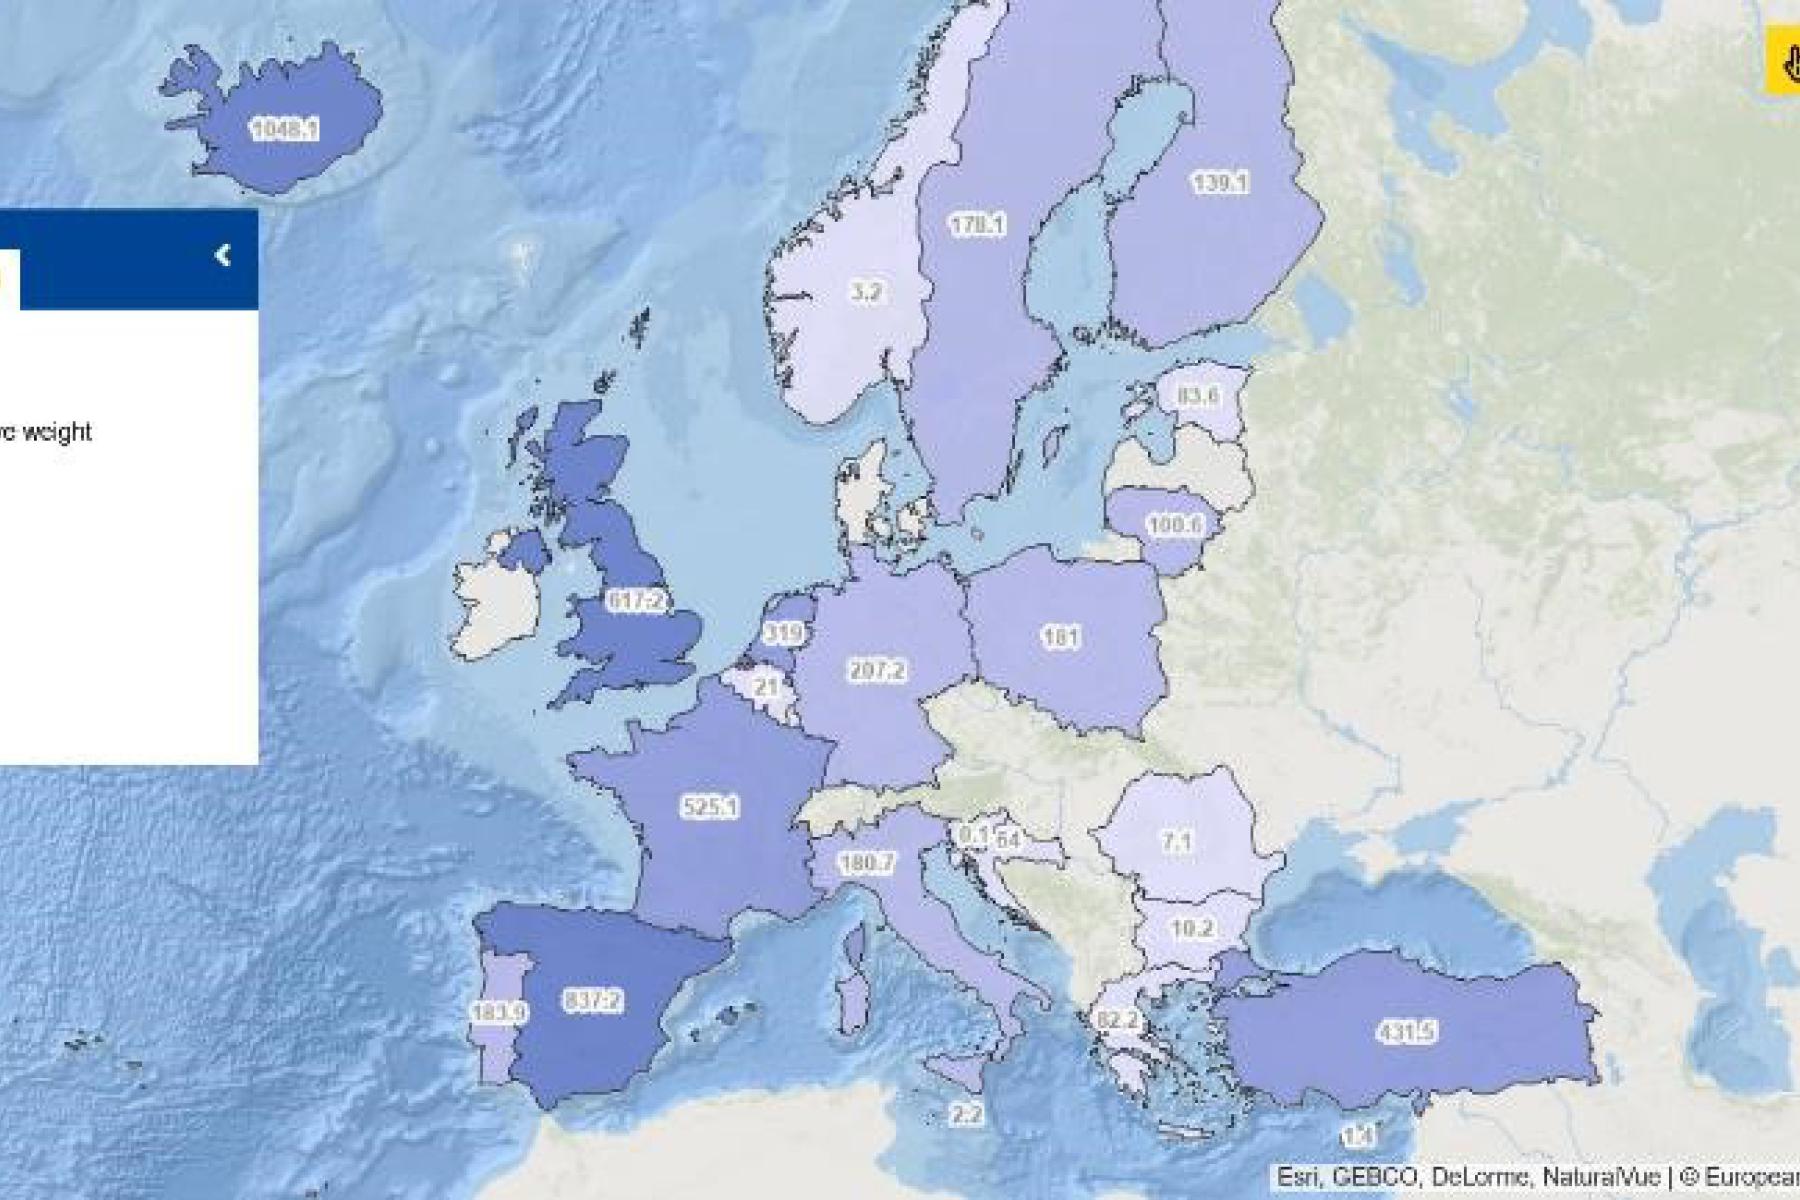 This map shows the total annual catch of fishery products by Member States of the European Union and some other major fishing nations, such as the United Kingdom, Norway, Iceland and Turkey. 